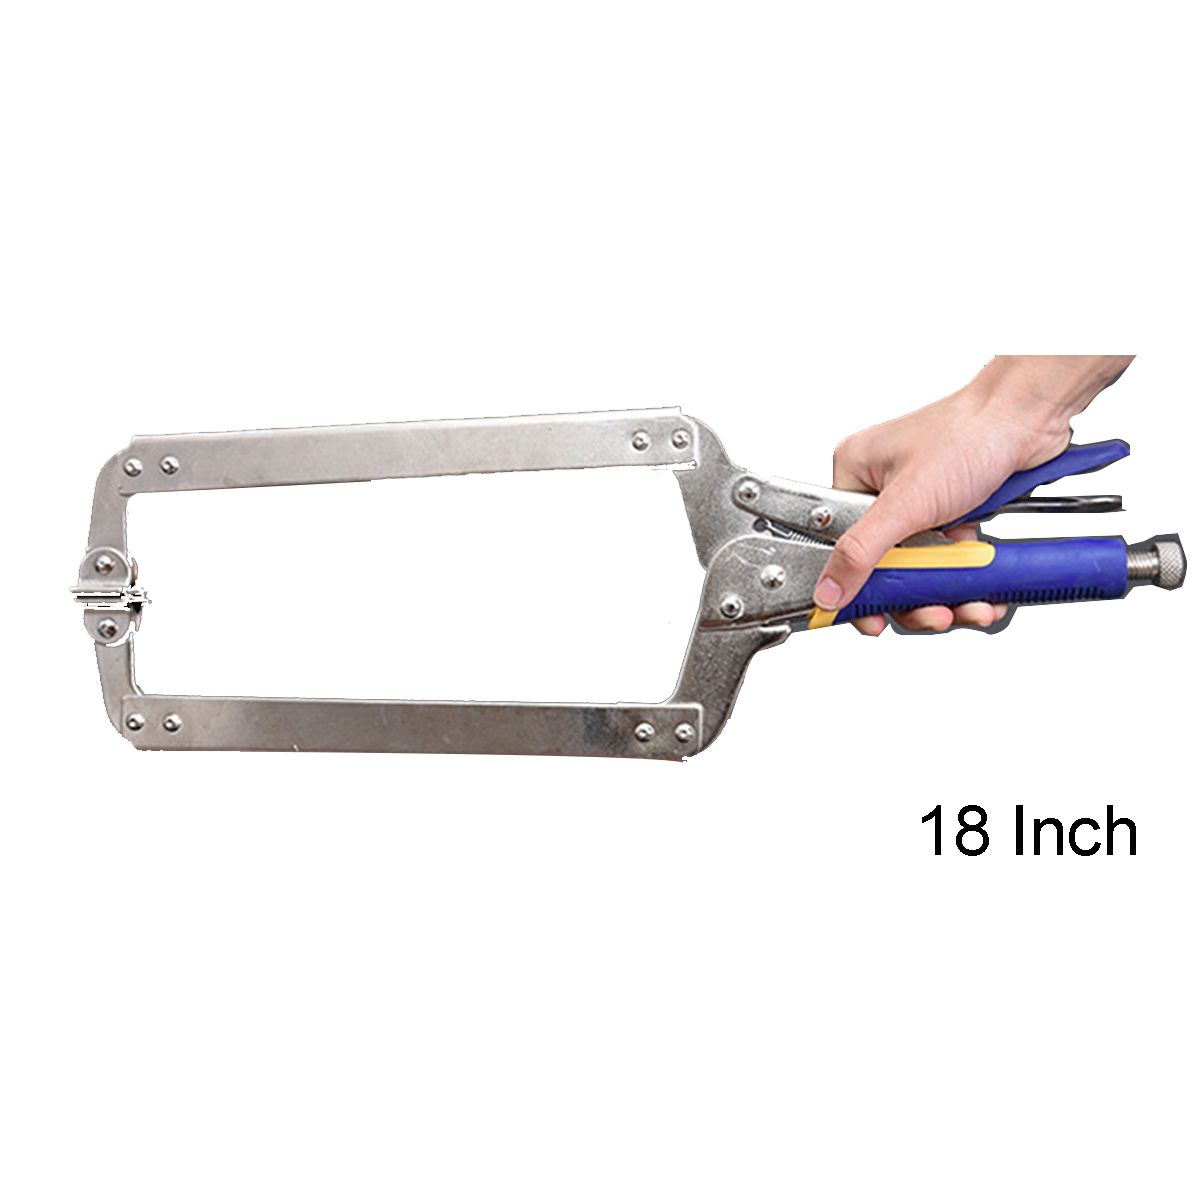 Steel-C-Type-Pliers-Locking-Clamp-Tool-Set-6-9-11-14-18-Inch-Face-Clamp-Hand-Tools-1550137